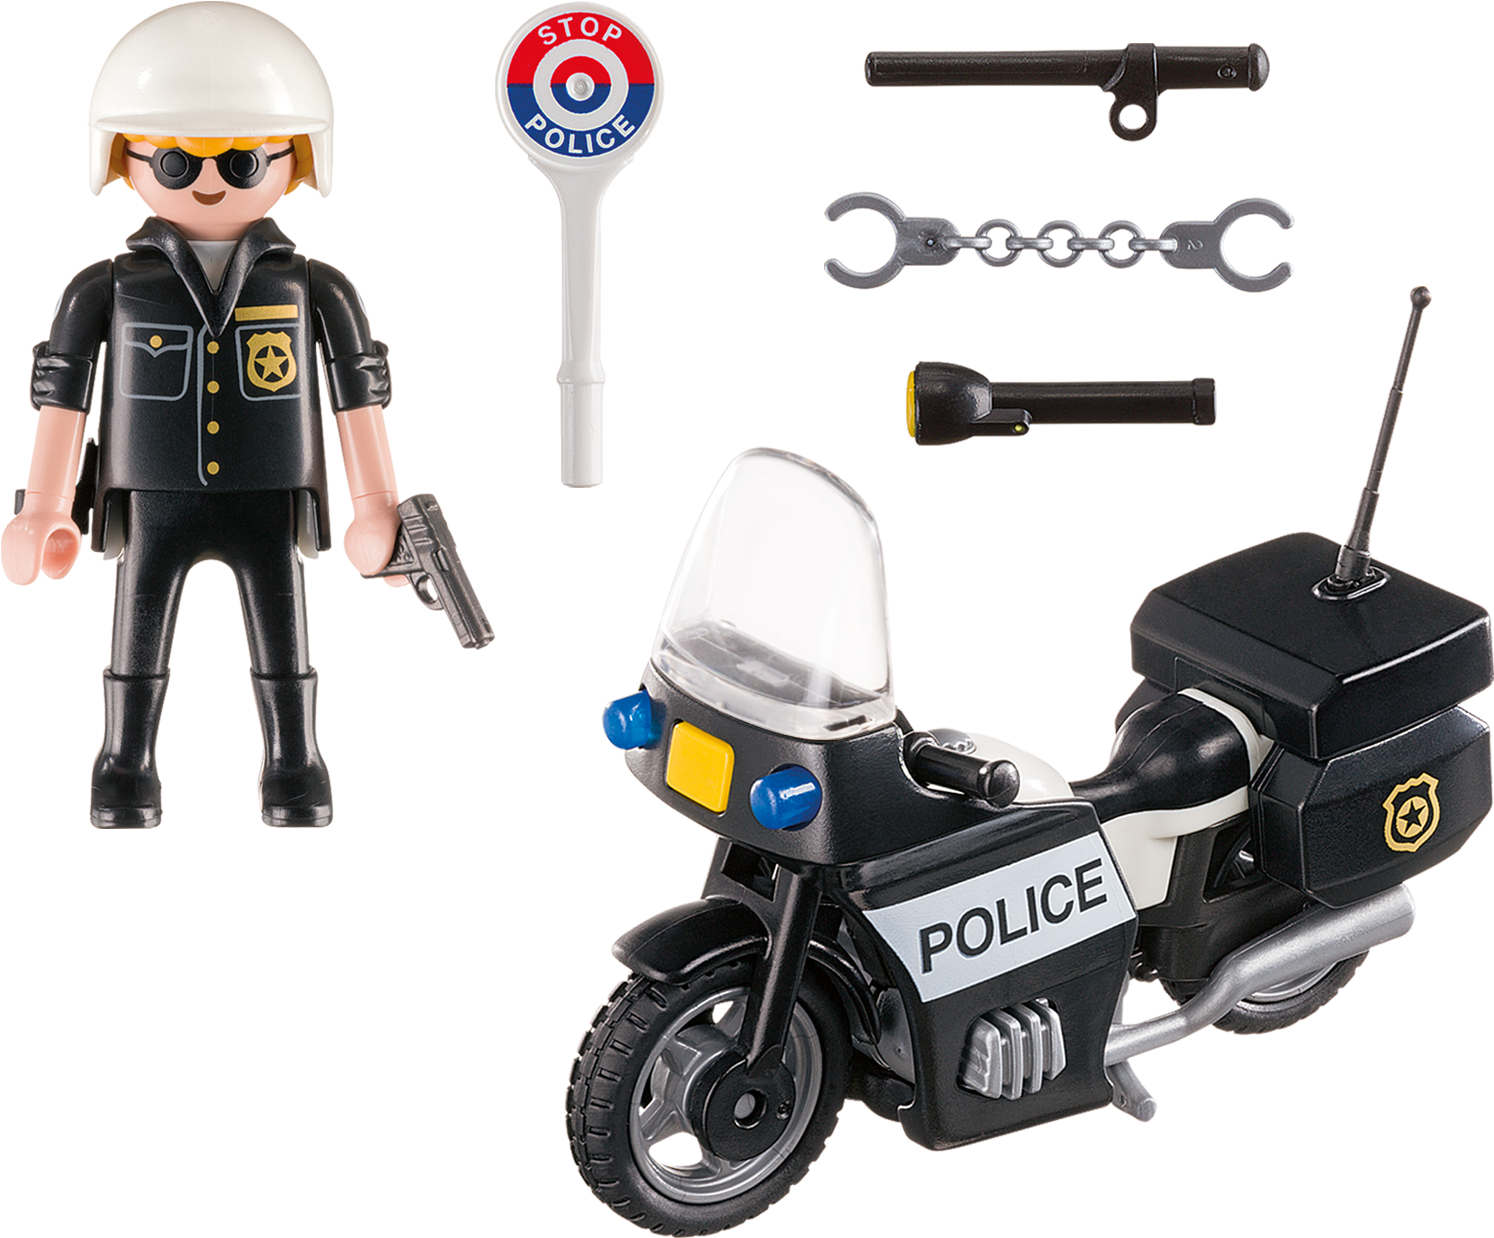 5648 Police Carry Case 5648 Product Box Front 5648 - Playmobil Police Carry Case (2000x1400)